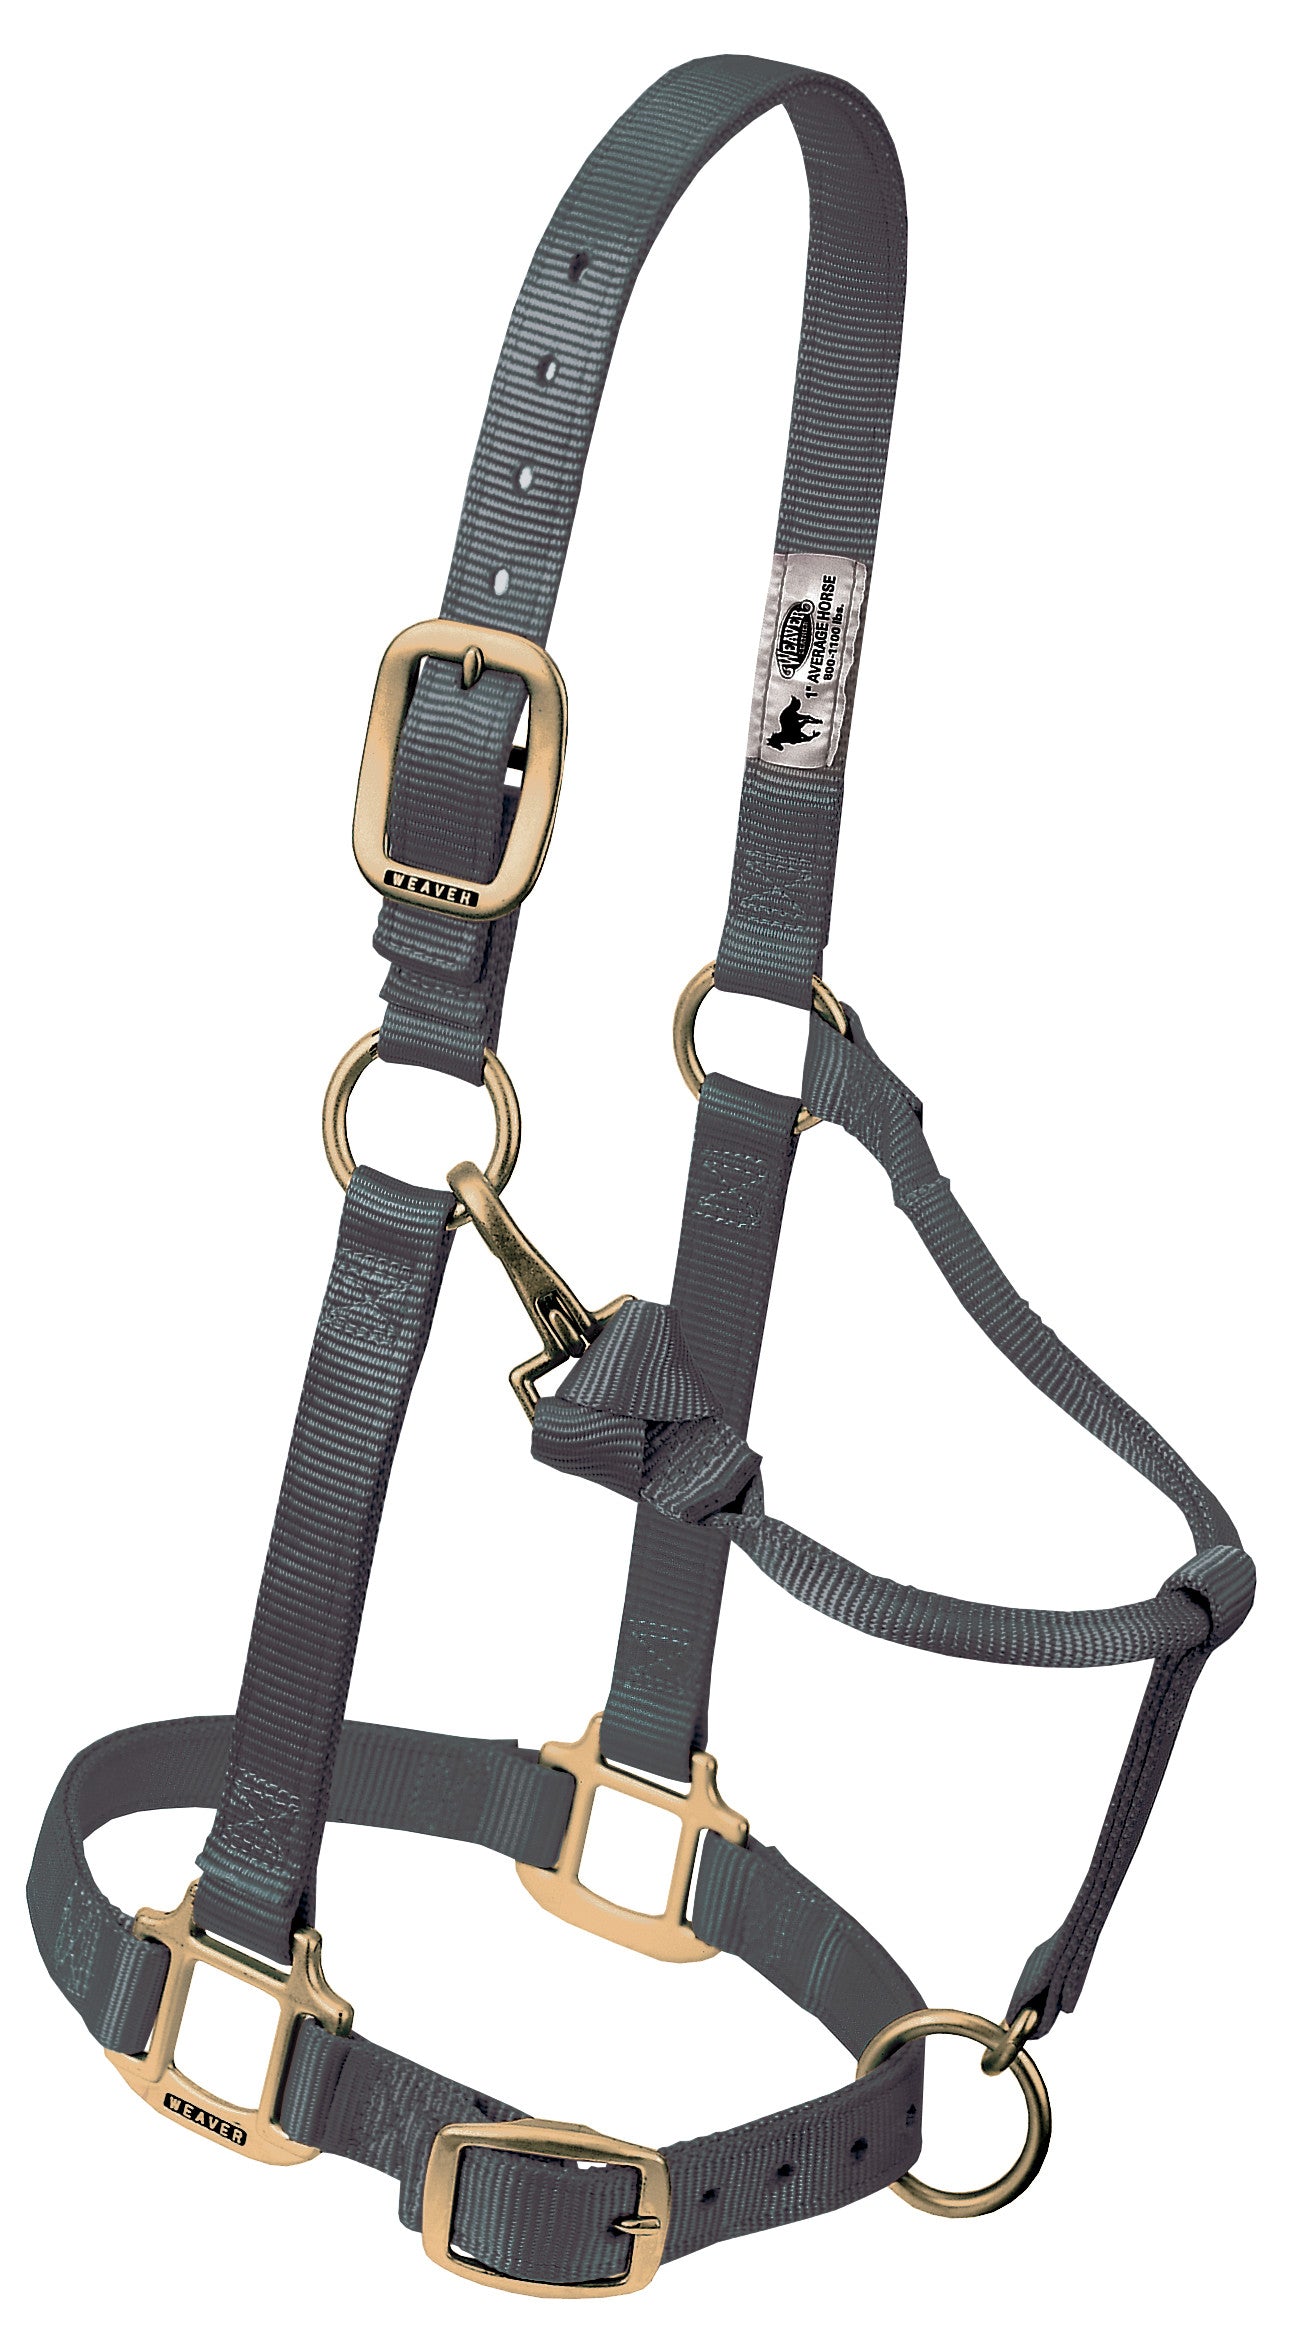 Weaver Leather Original Adjustable Chin and Throat Snap Halter, 1" Large Horse or 2-Year-Old Draft